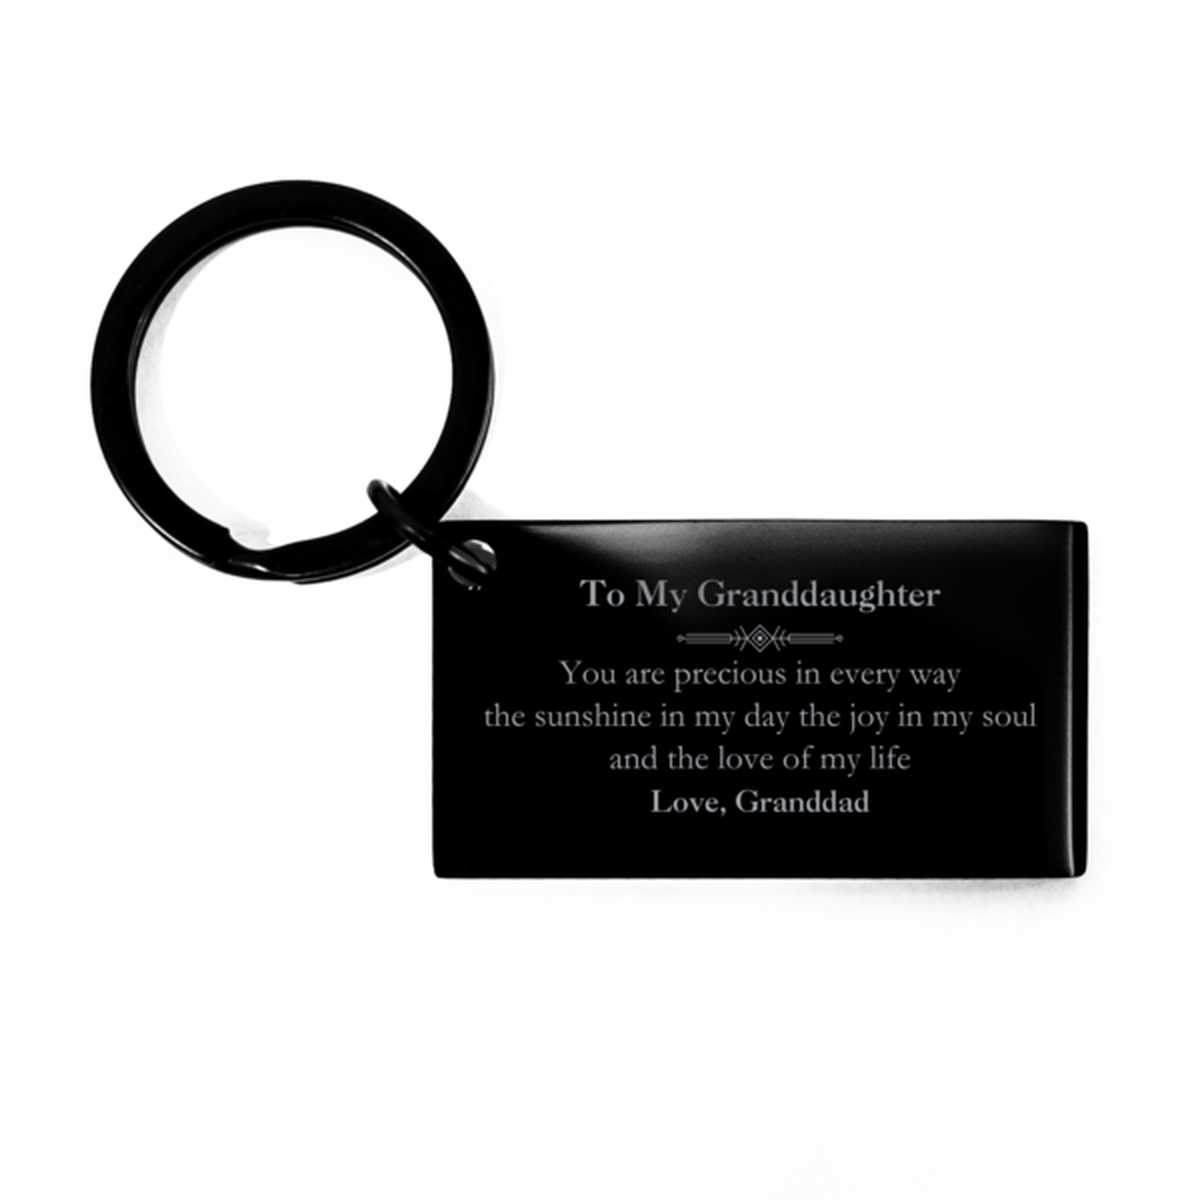 Graduation Gifts for Granddaughter Keychain Present from Granddad, Christmas Granddaughter Birthday Gifts Granddaughter You are precious in every way the sunshine in my day. Love, Granddad